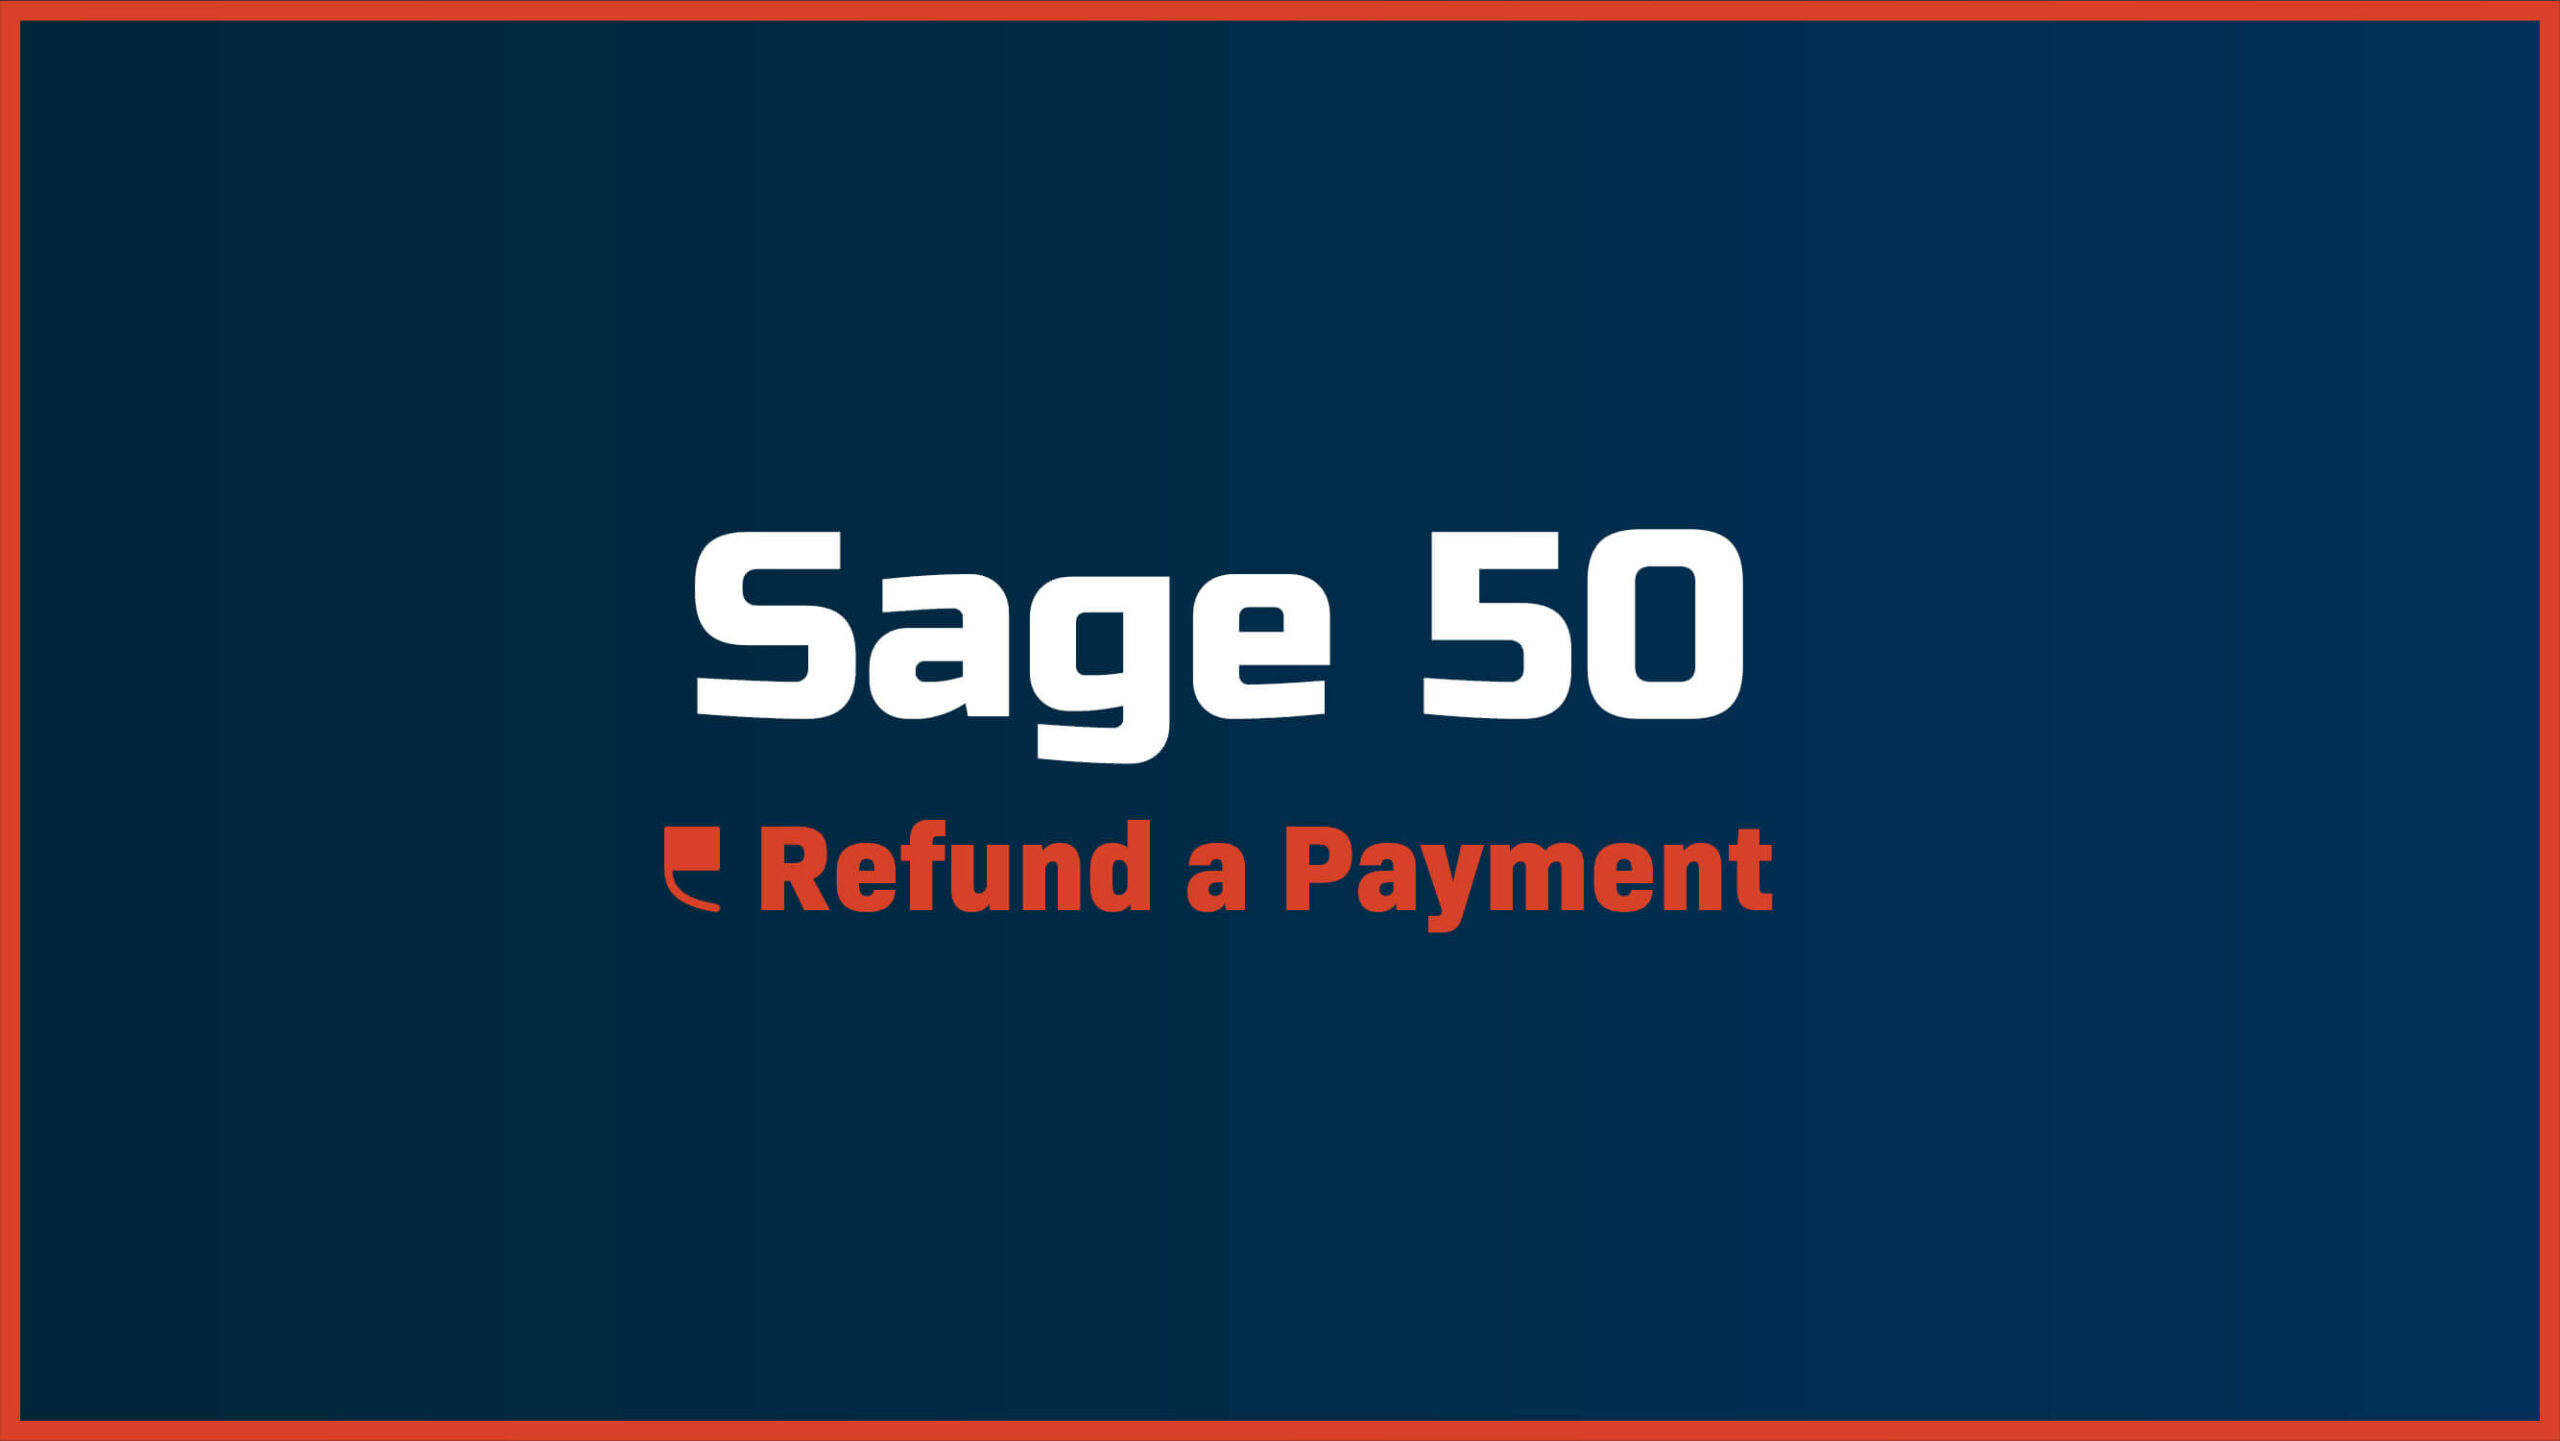 Sage 50 – How to Refund a Payment - Featured Image